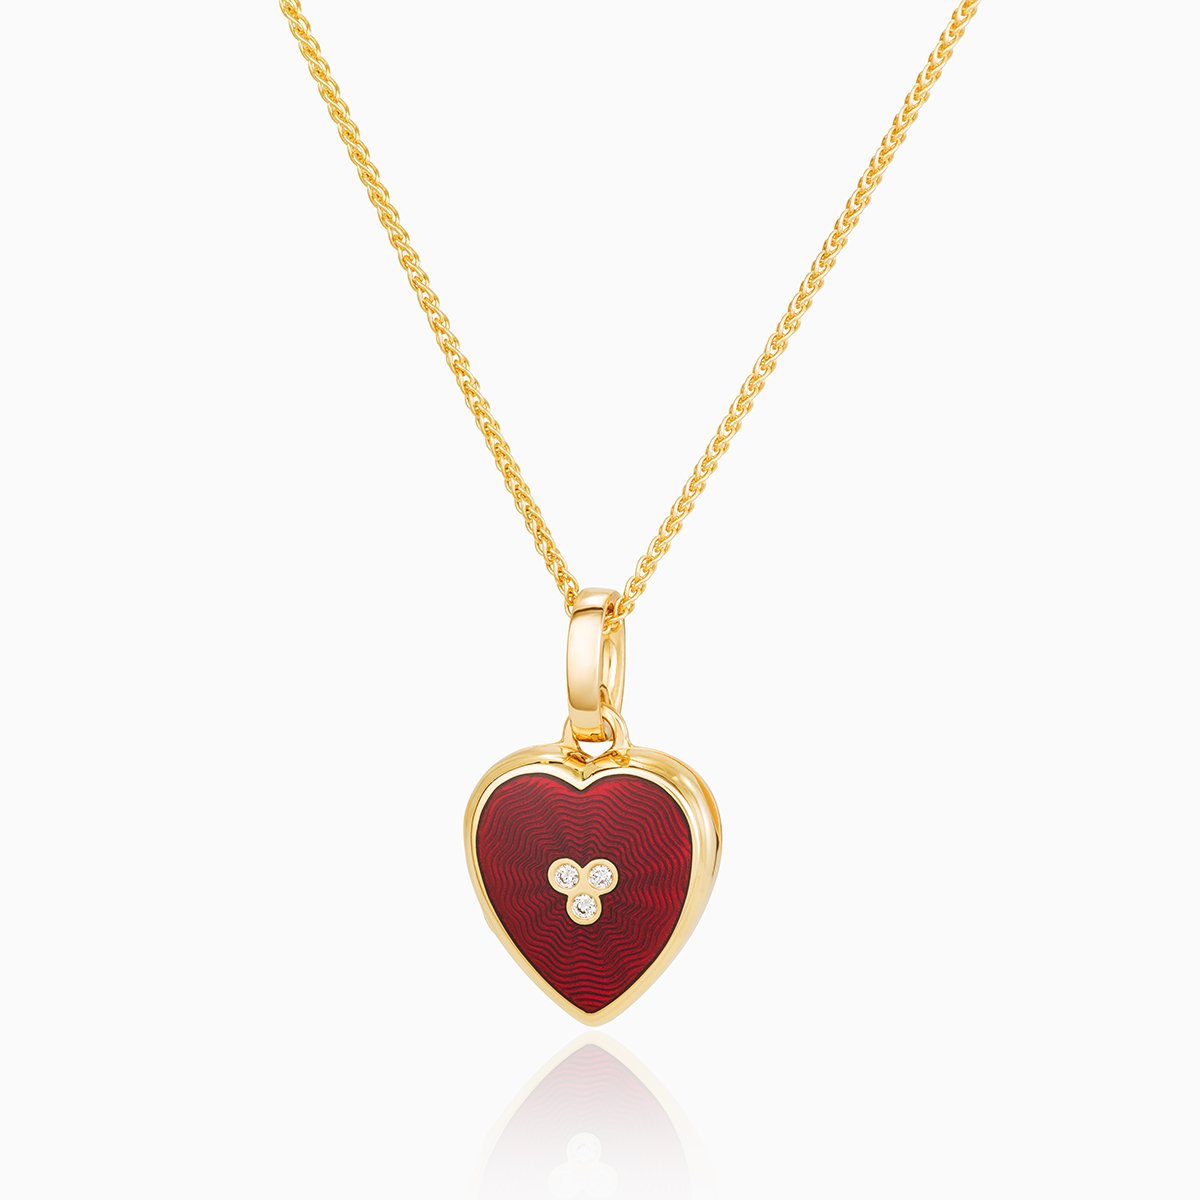 18 ct gold heart locket set with red guilloche enamel and 3 central diamonds on an 18 gold spiga chain